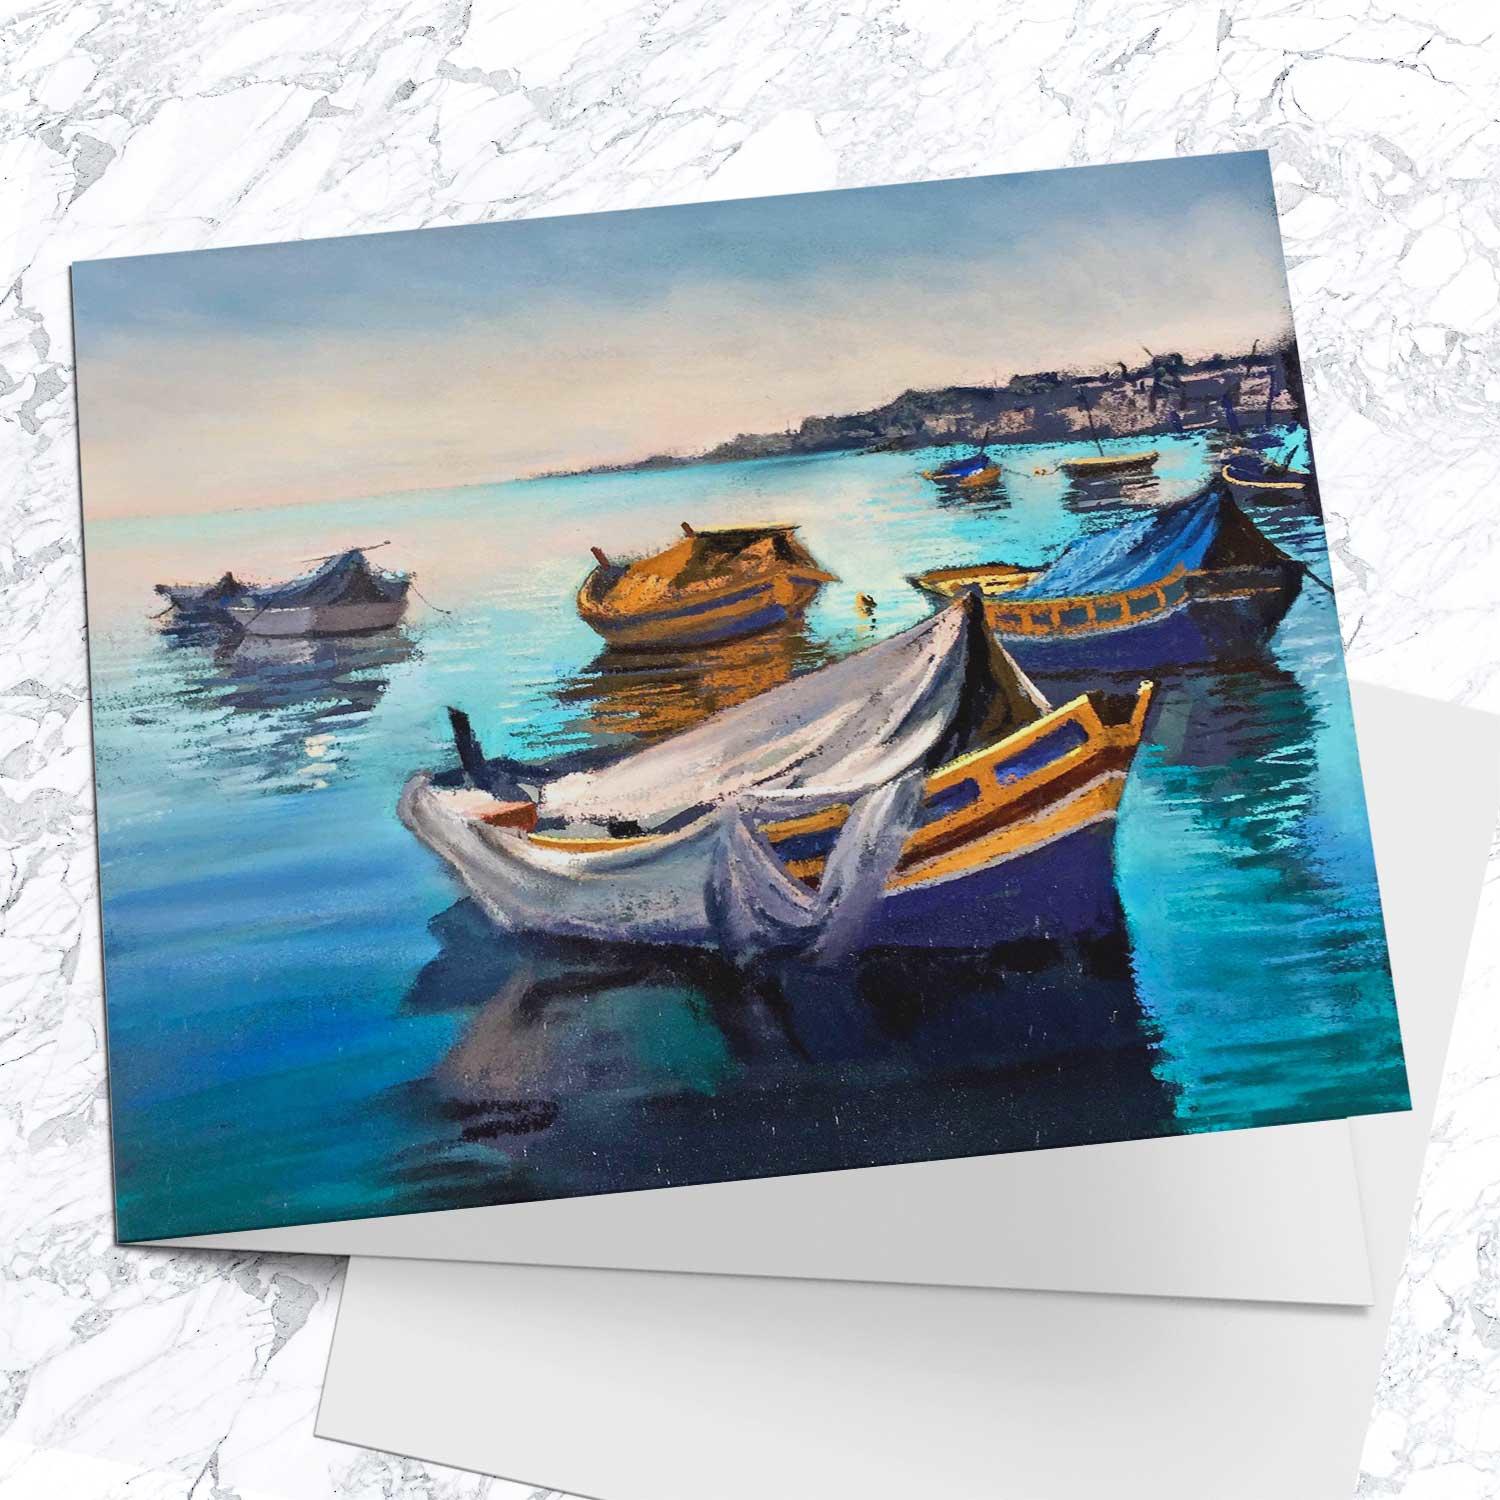 Reflections, Malta Greeting Card from an original painting by artist Margaret Evans